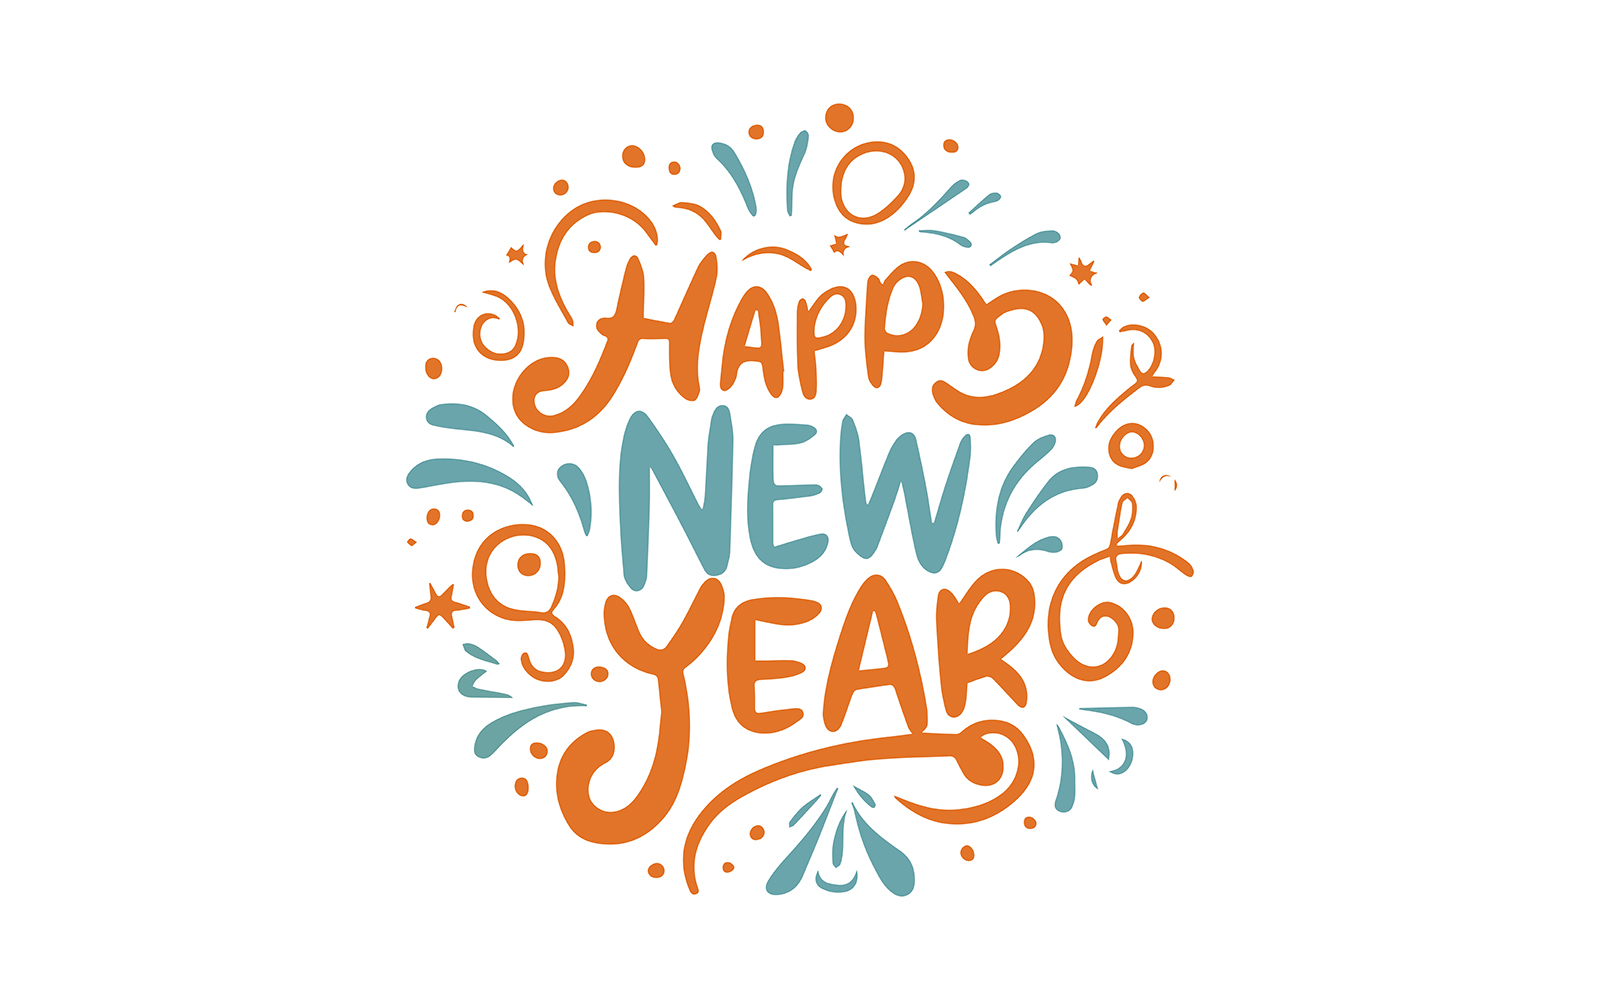 Happy New Year text for greeting card Vector illustration